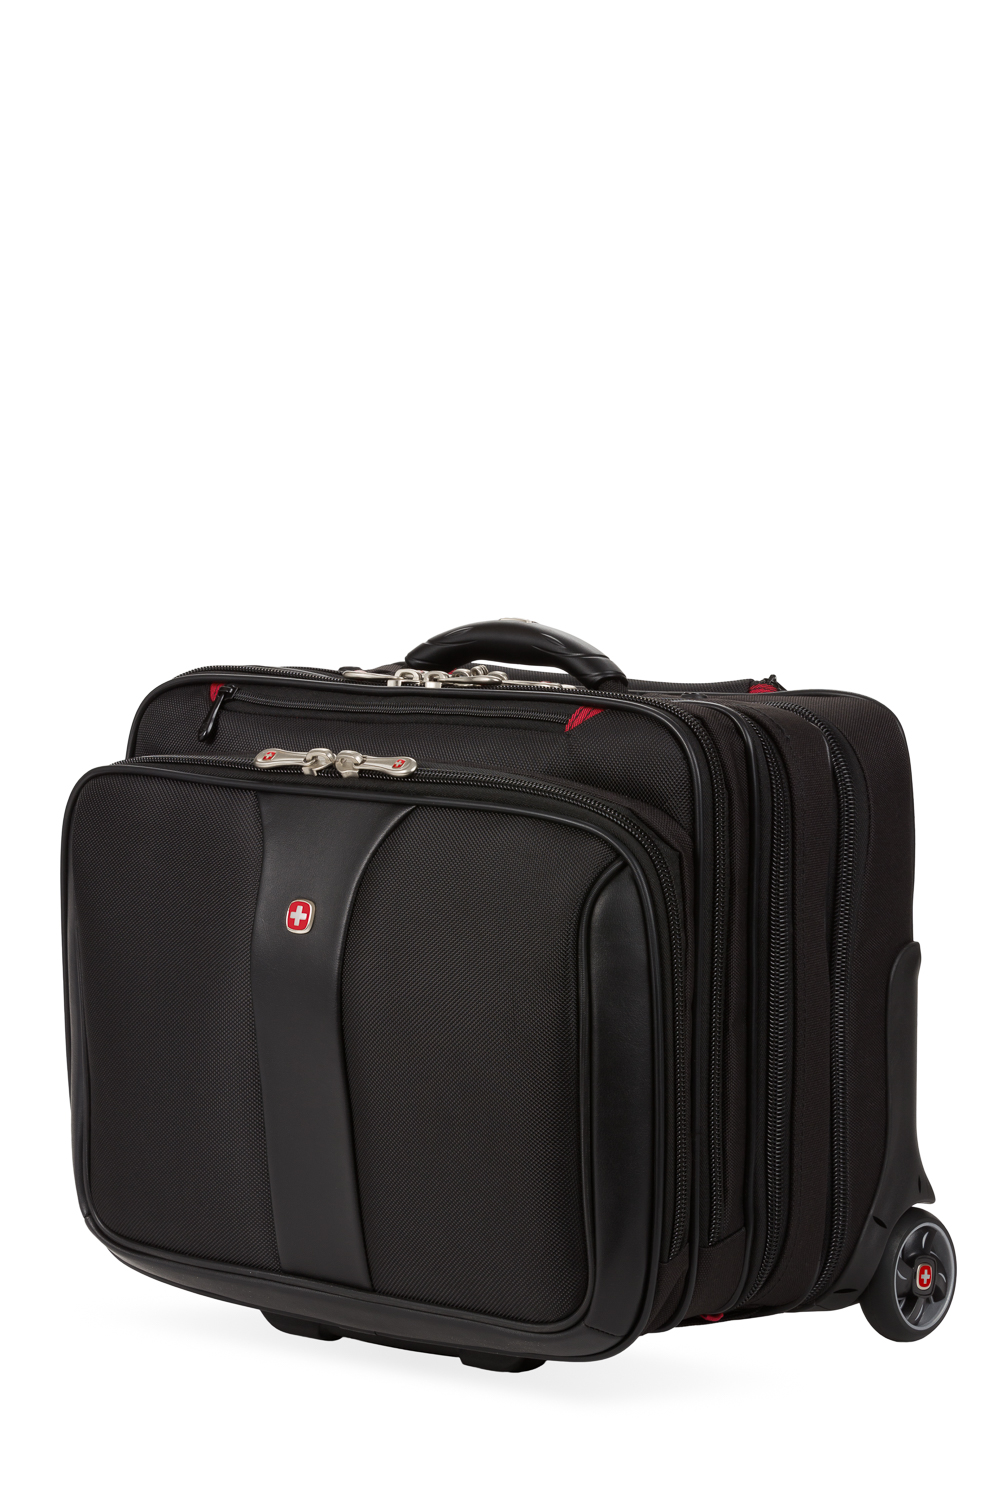 Buy the SwissGear Wenger Wheeled Patriot Rolling Business Travel Bag  Computer Laptop Carry On Luggage | GoodwillFinds